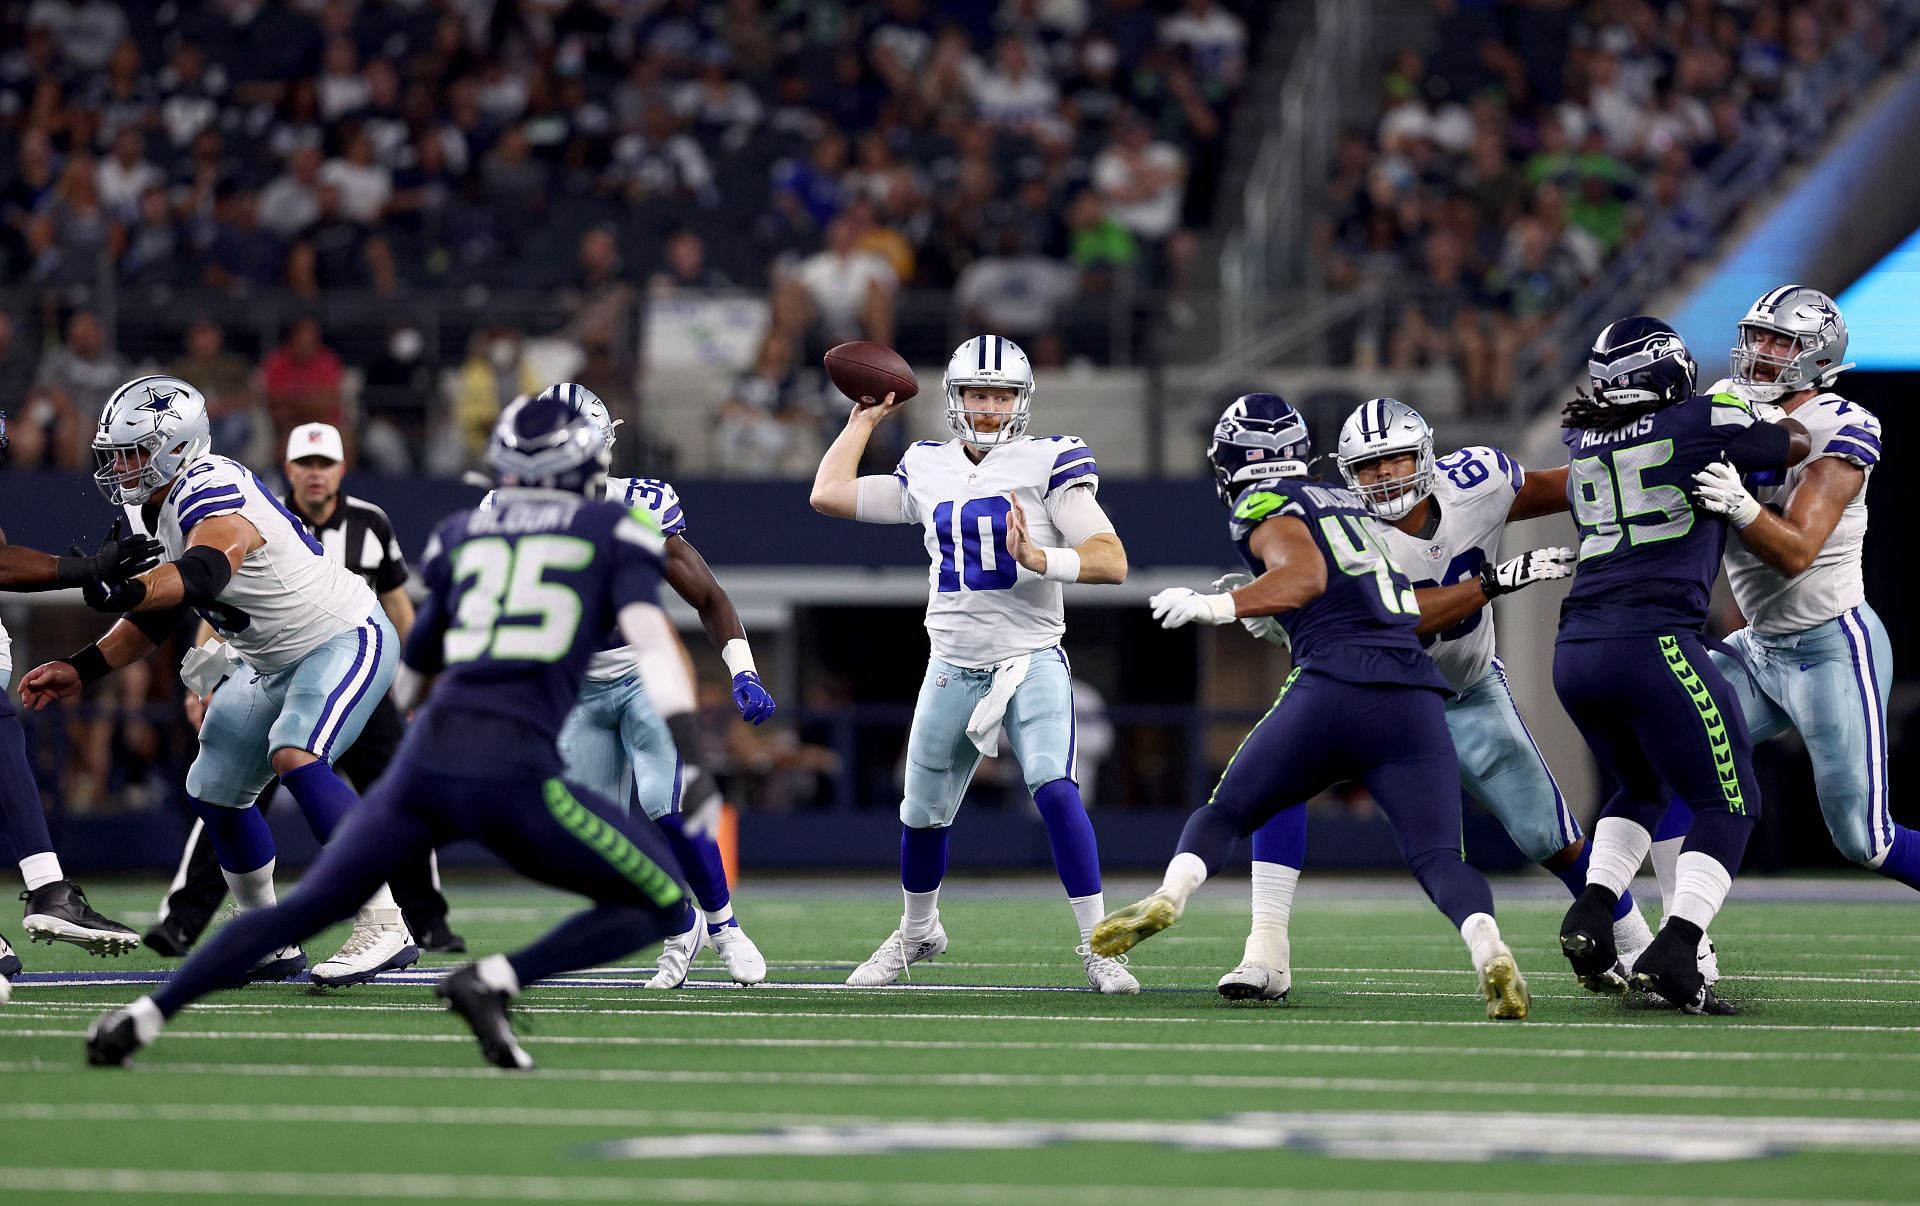 Dak Prescott will be missing in action and Cooper Rush will take his place